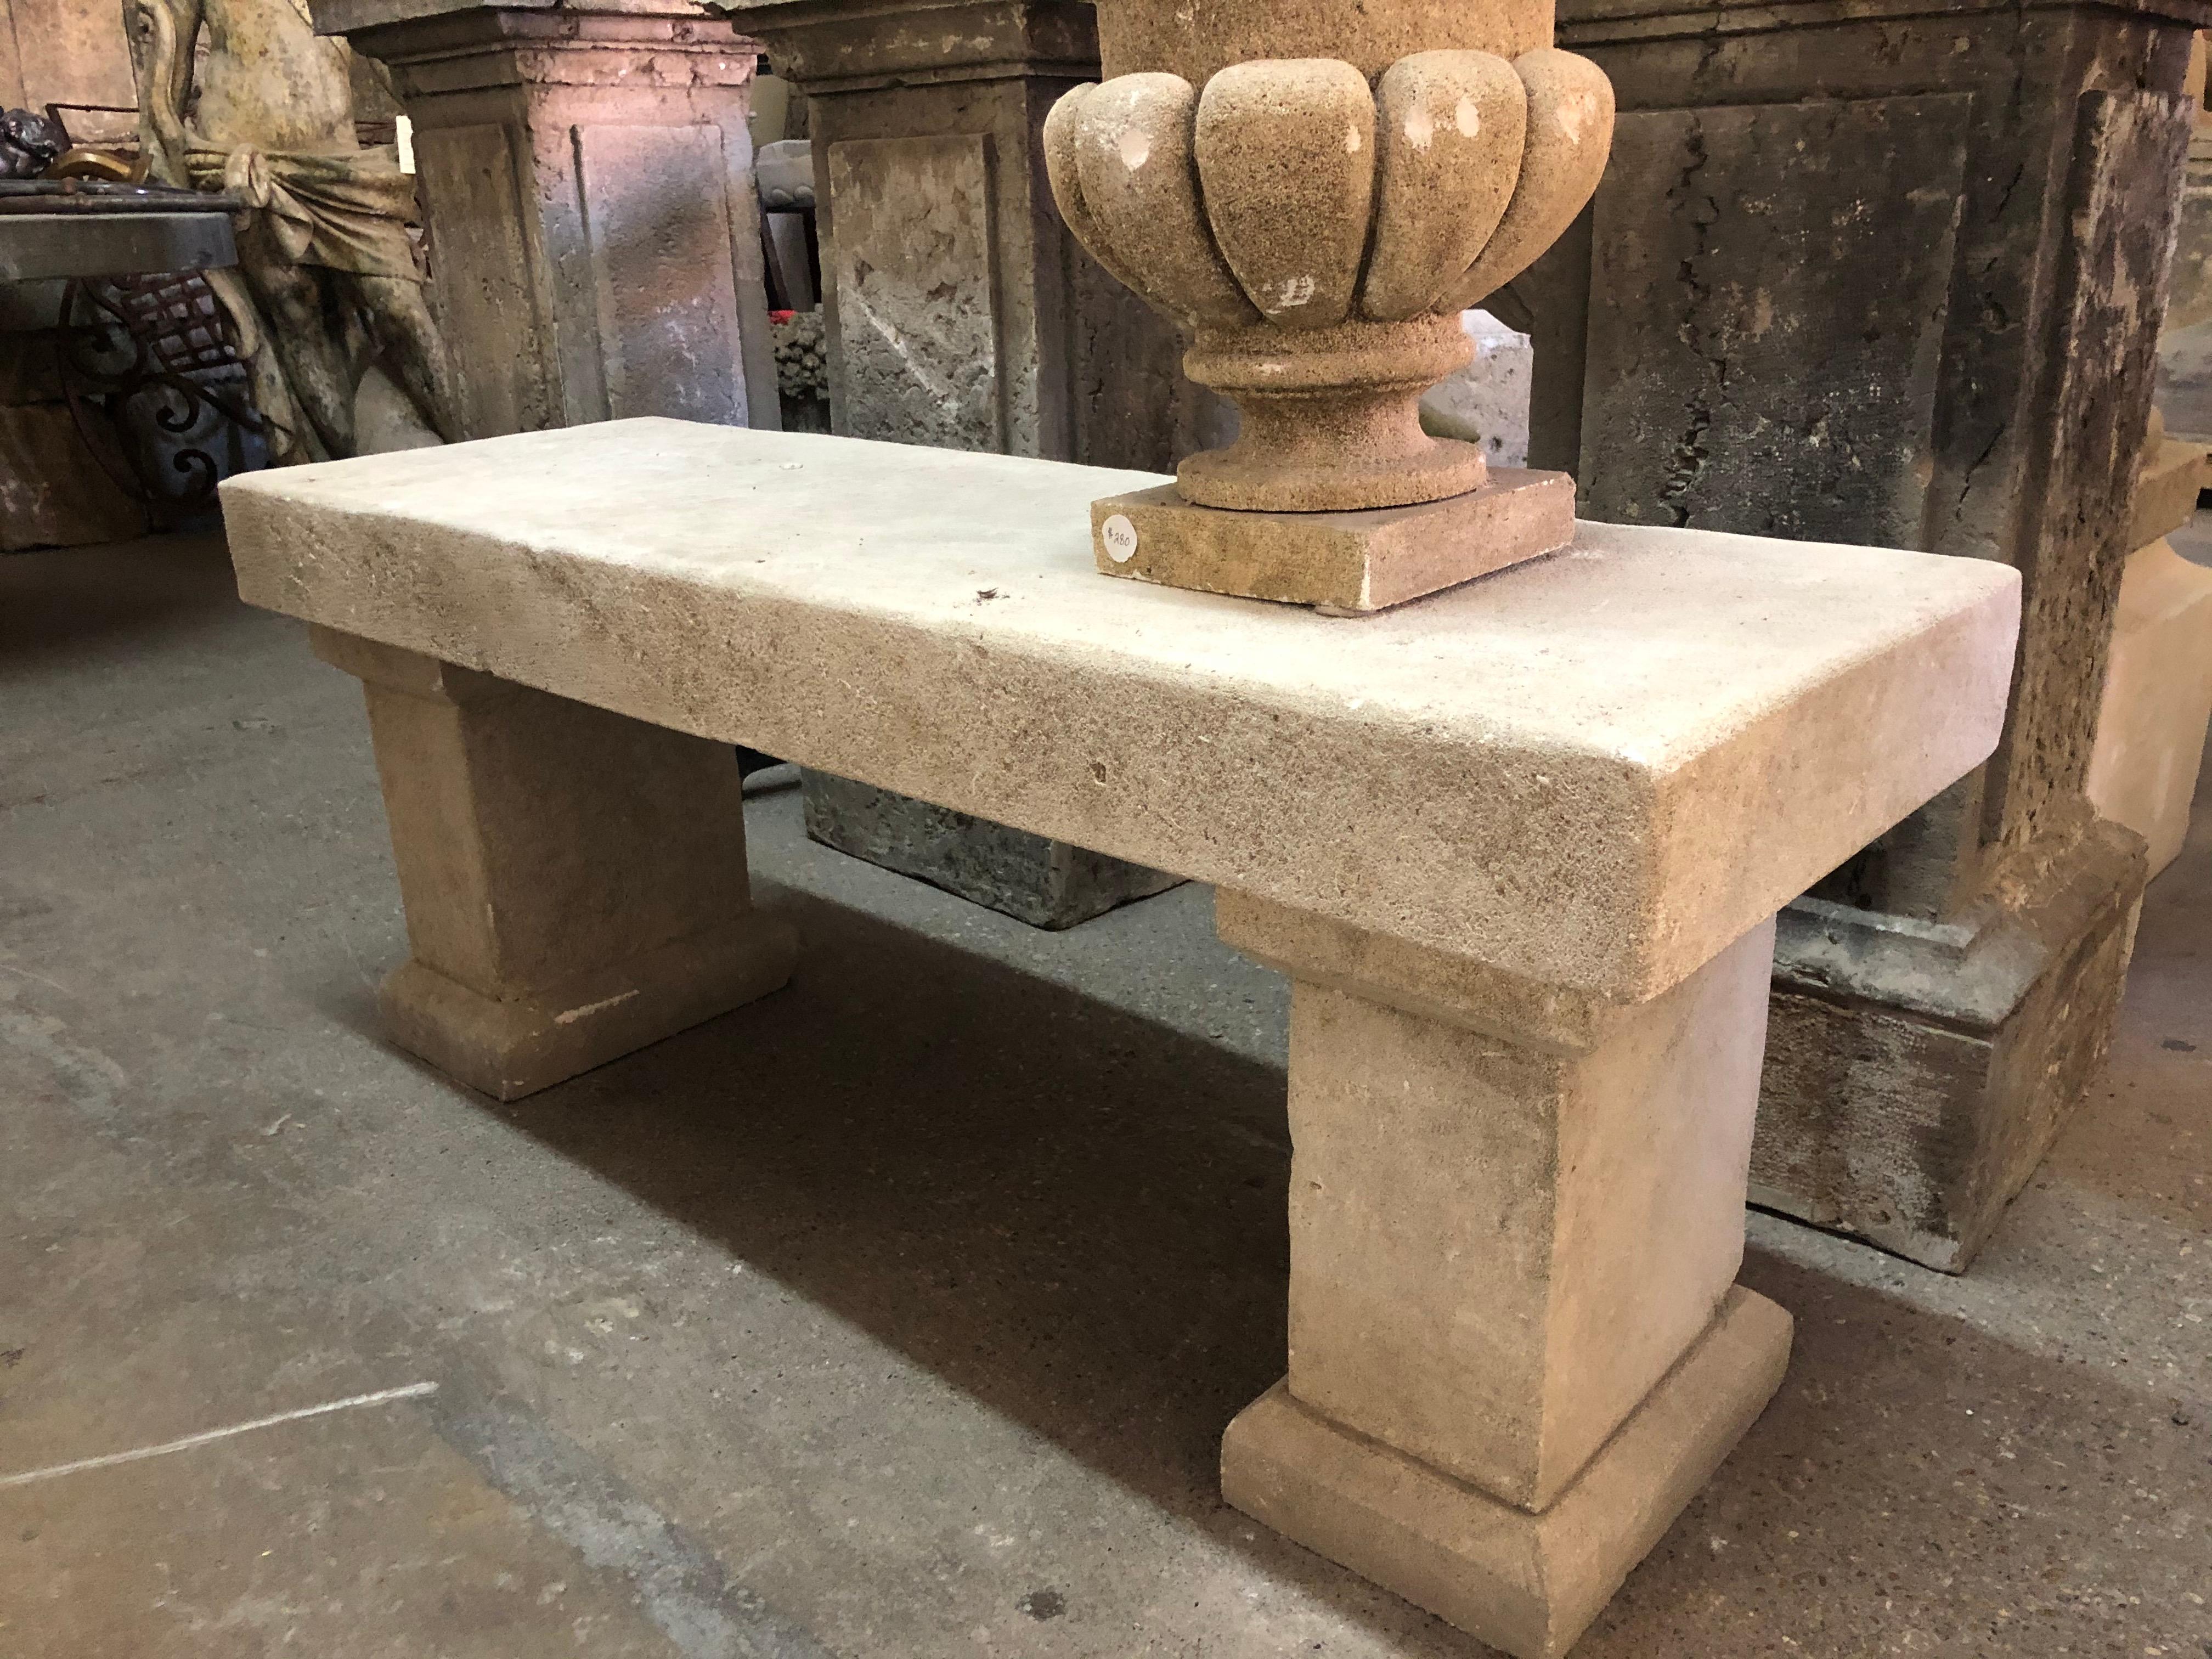 Limestone bench imported from France.

Measurements: 19 1/2